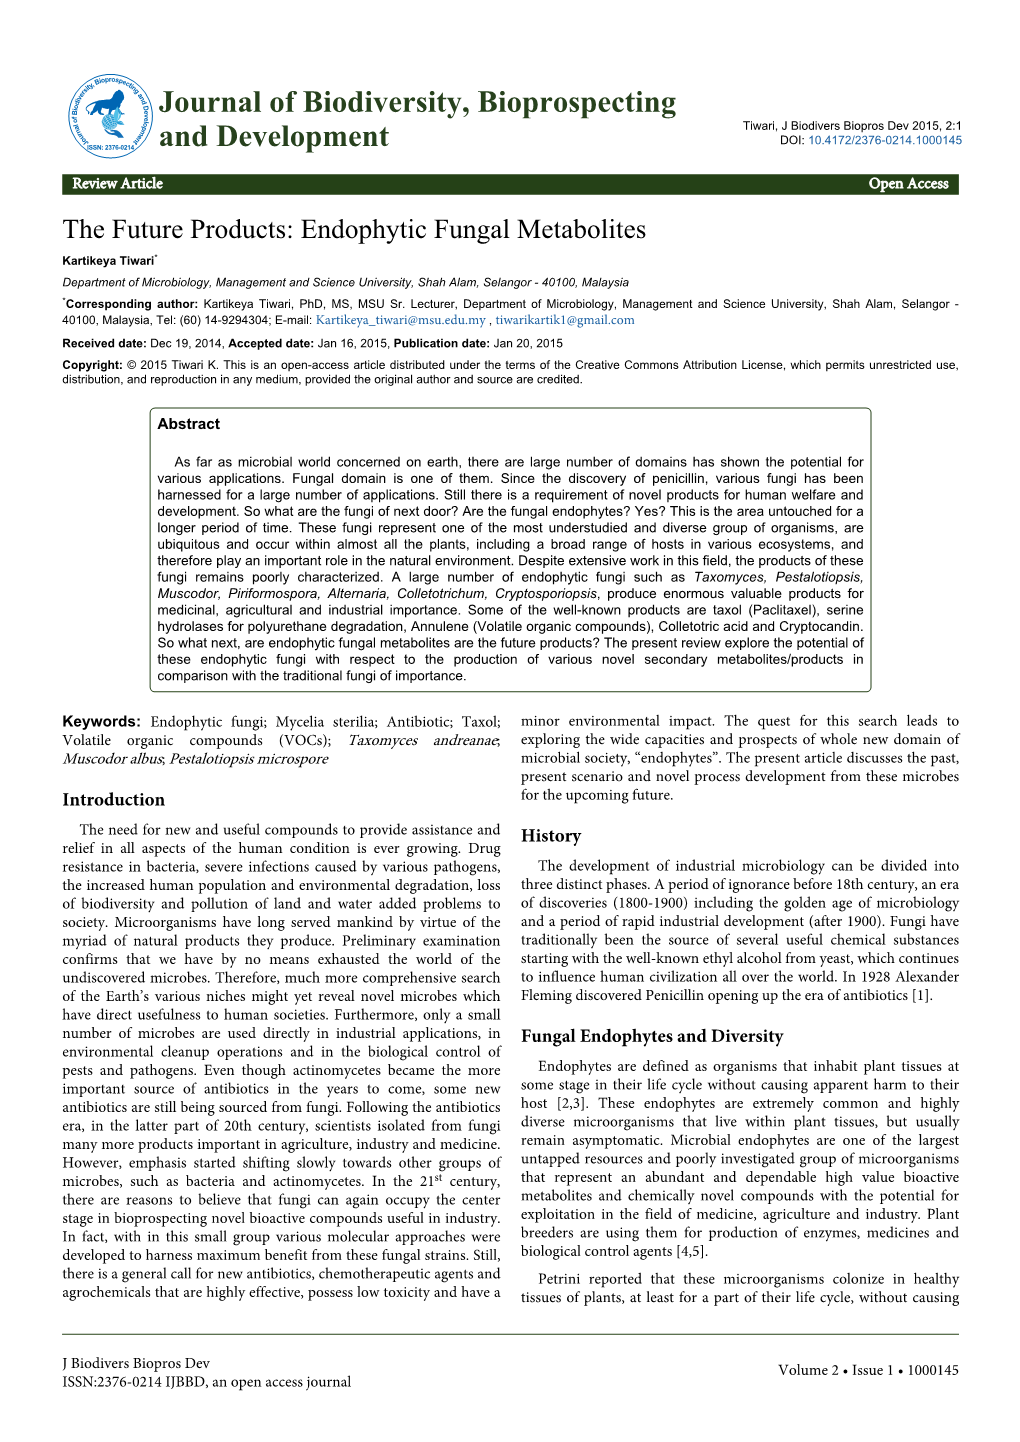 The Future Products: Endophytic Fungal Metabolites